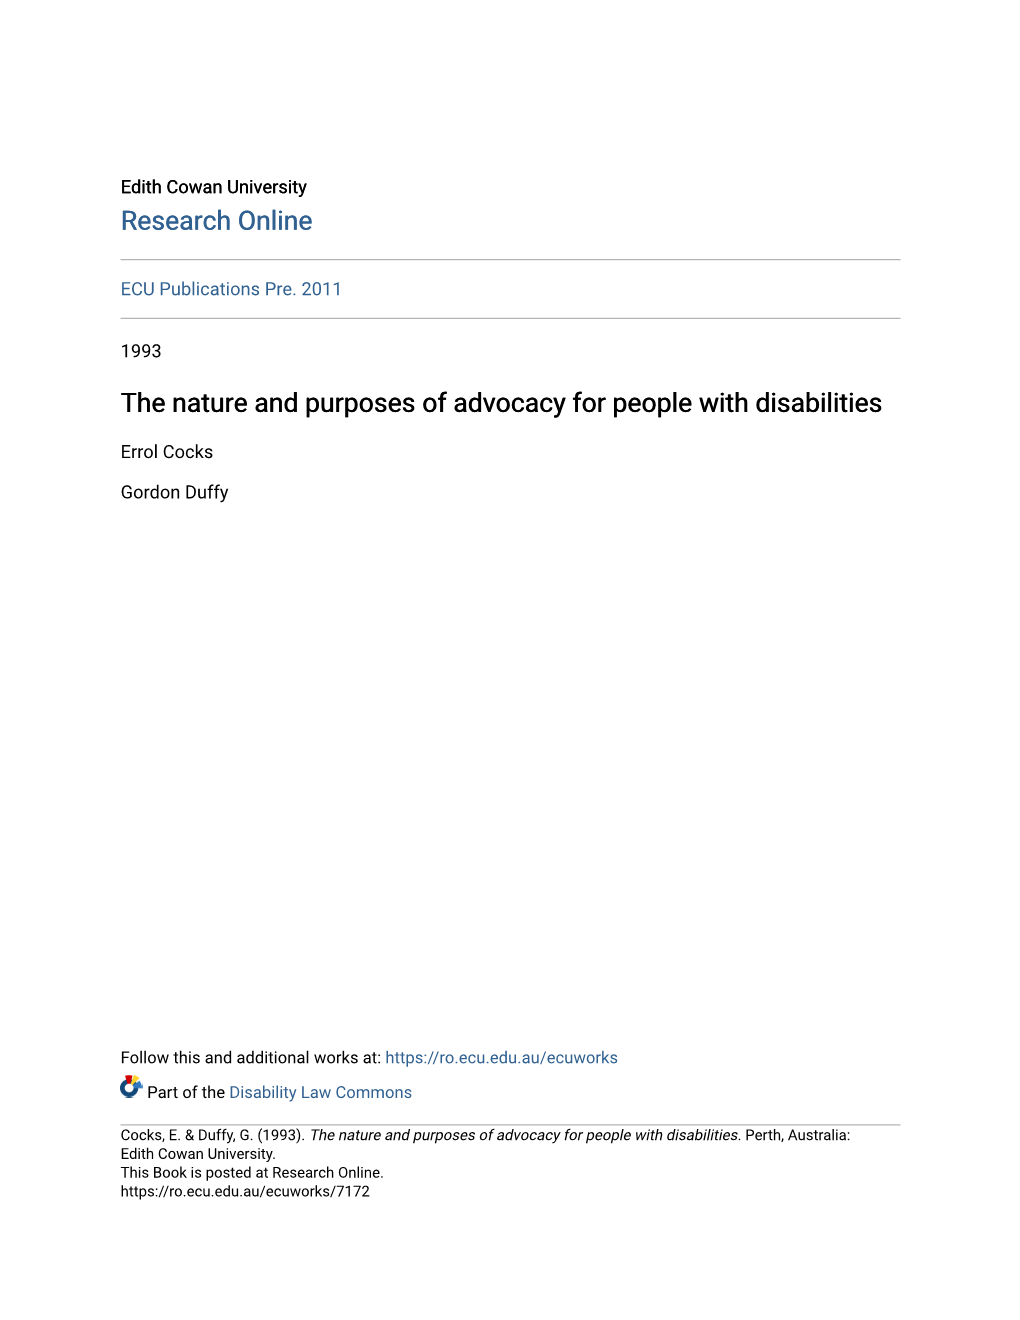 The Nature and Purposes of Advocacy for People with Disabilities